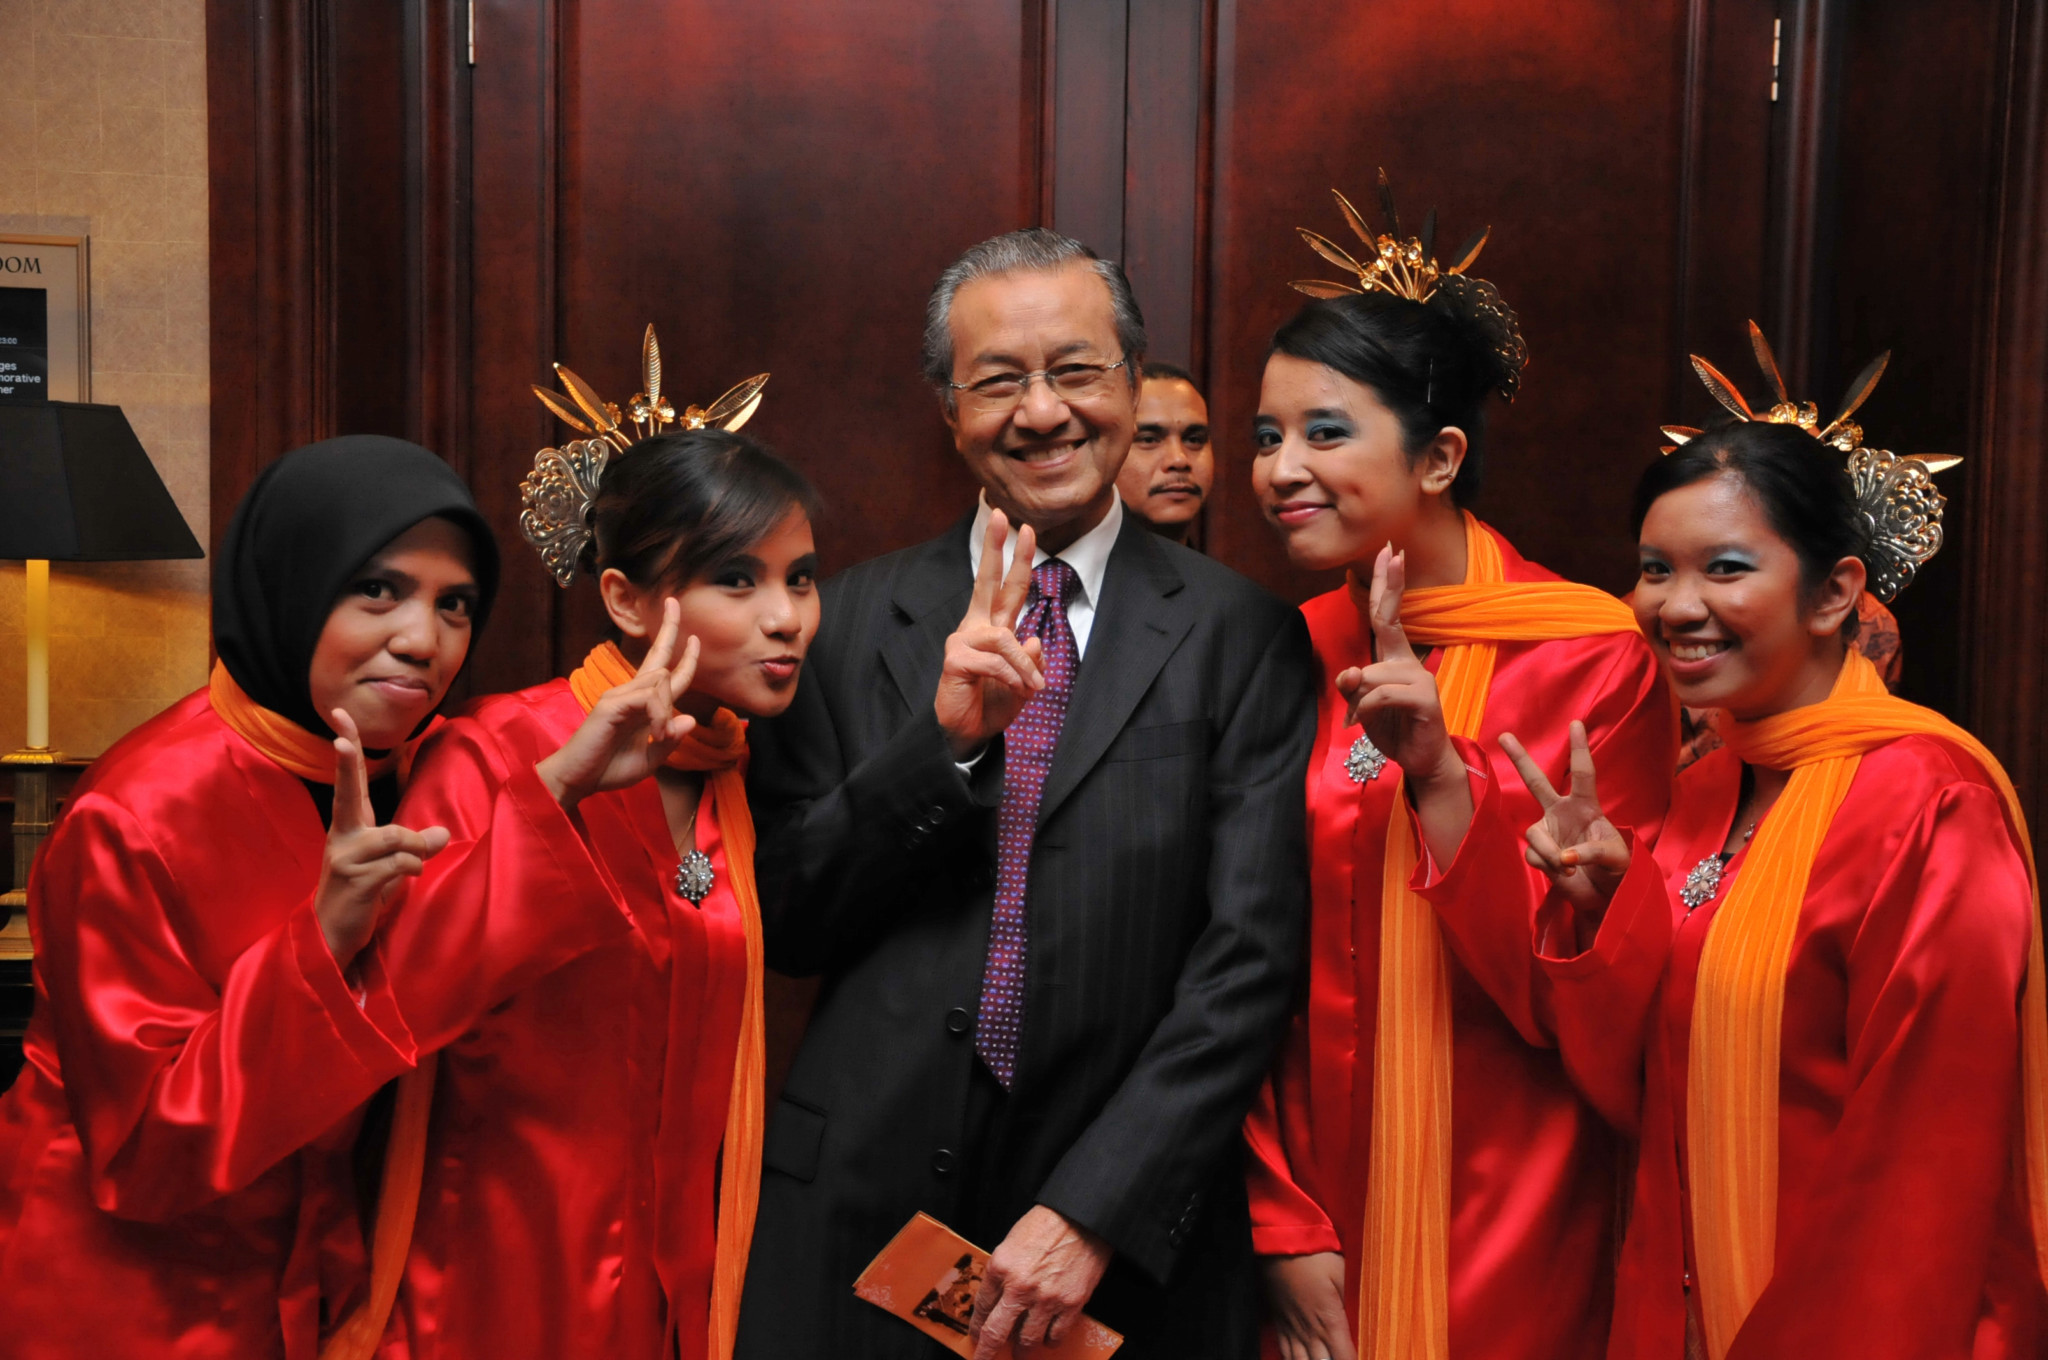 Former Prime Minister of Malaysia Tun Dr. Mahathir bin Mohamad